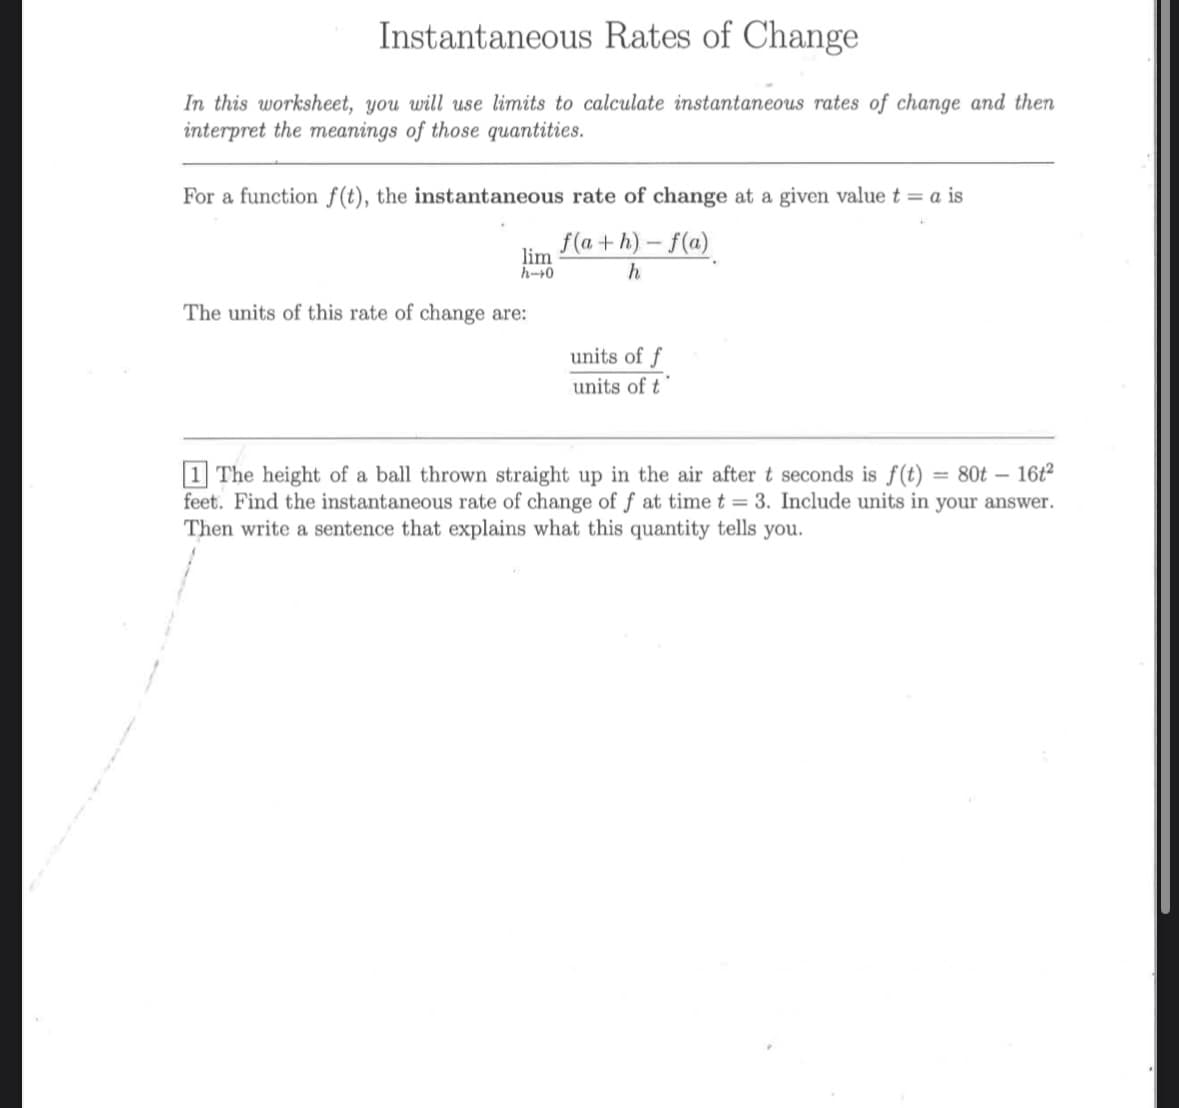 Instantaneous Rates of Change
In this worksheet, you will use limits to calculate instantaneous rates of change and then
interpret the meanings of those quantities.
For a function f(t), the instantaneous rate of change at a given value t = a is
f(a+h)-f(a)
h
lim
h-0
The units of this rate of change are:
units of f
units of t
-
80t 16t2
1 The height of a ball thrown straight up in the air after t seconds is f(t) =
feet. Find the instantaneous rate of change of f at time t = 3. Include units in your answer.
Then write a sentence that explains what this quantity tells you.